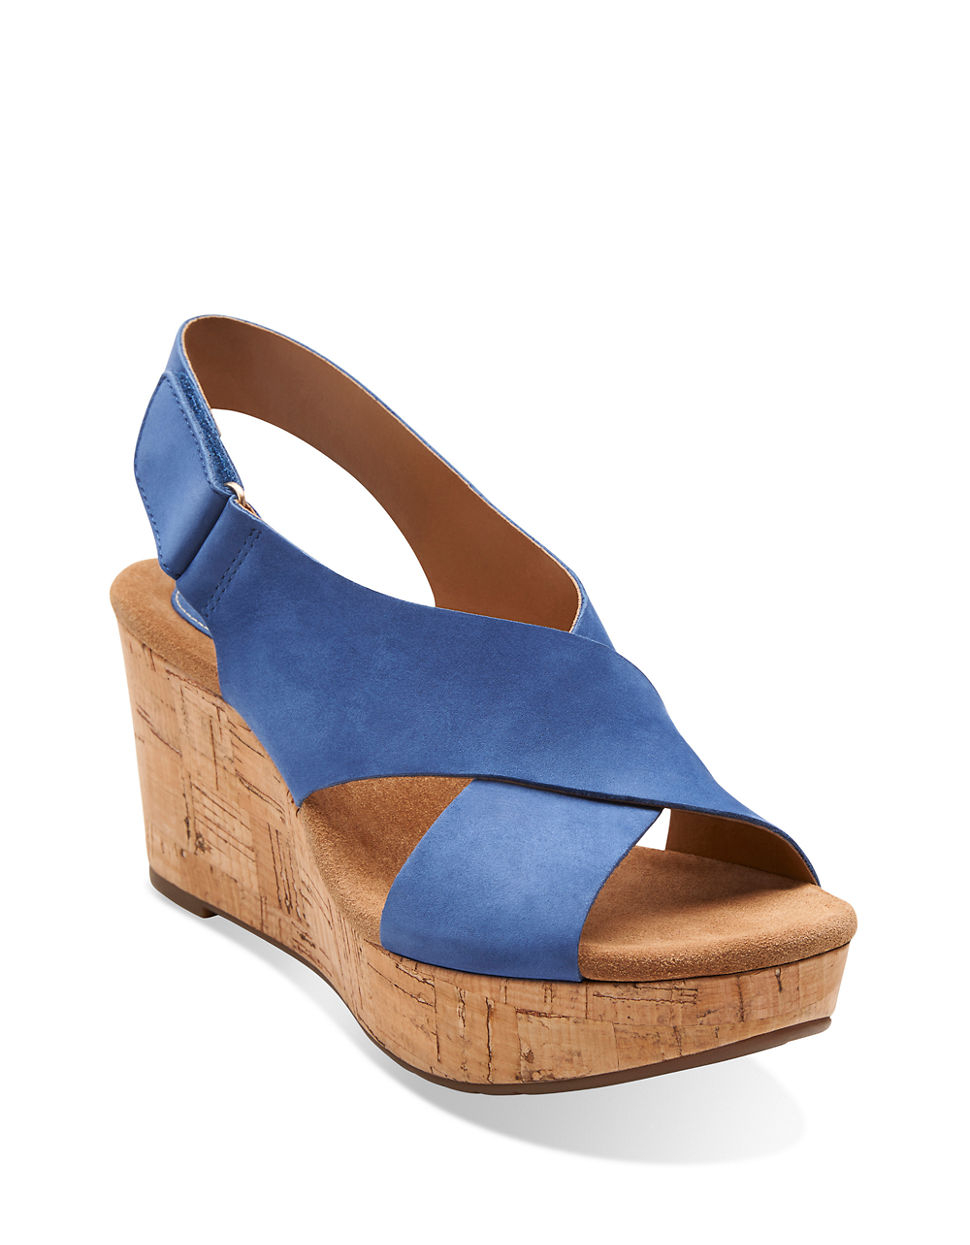 clarks wedge sandals canada off 62 